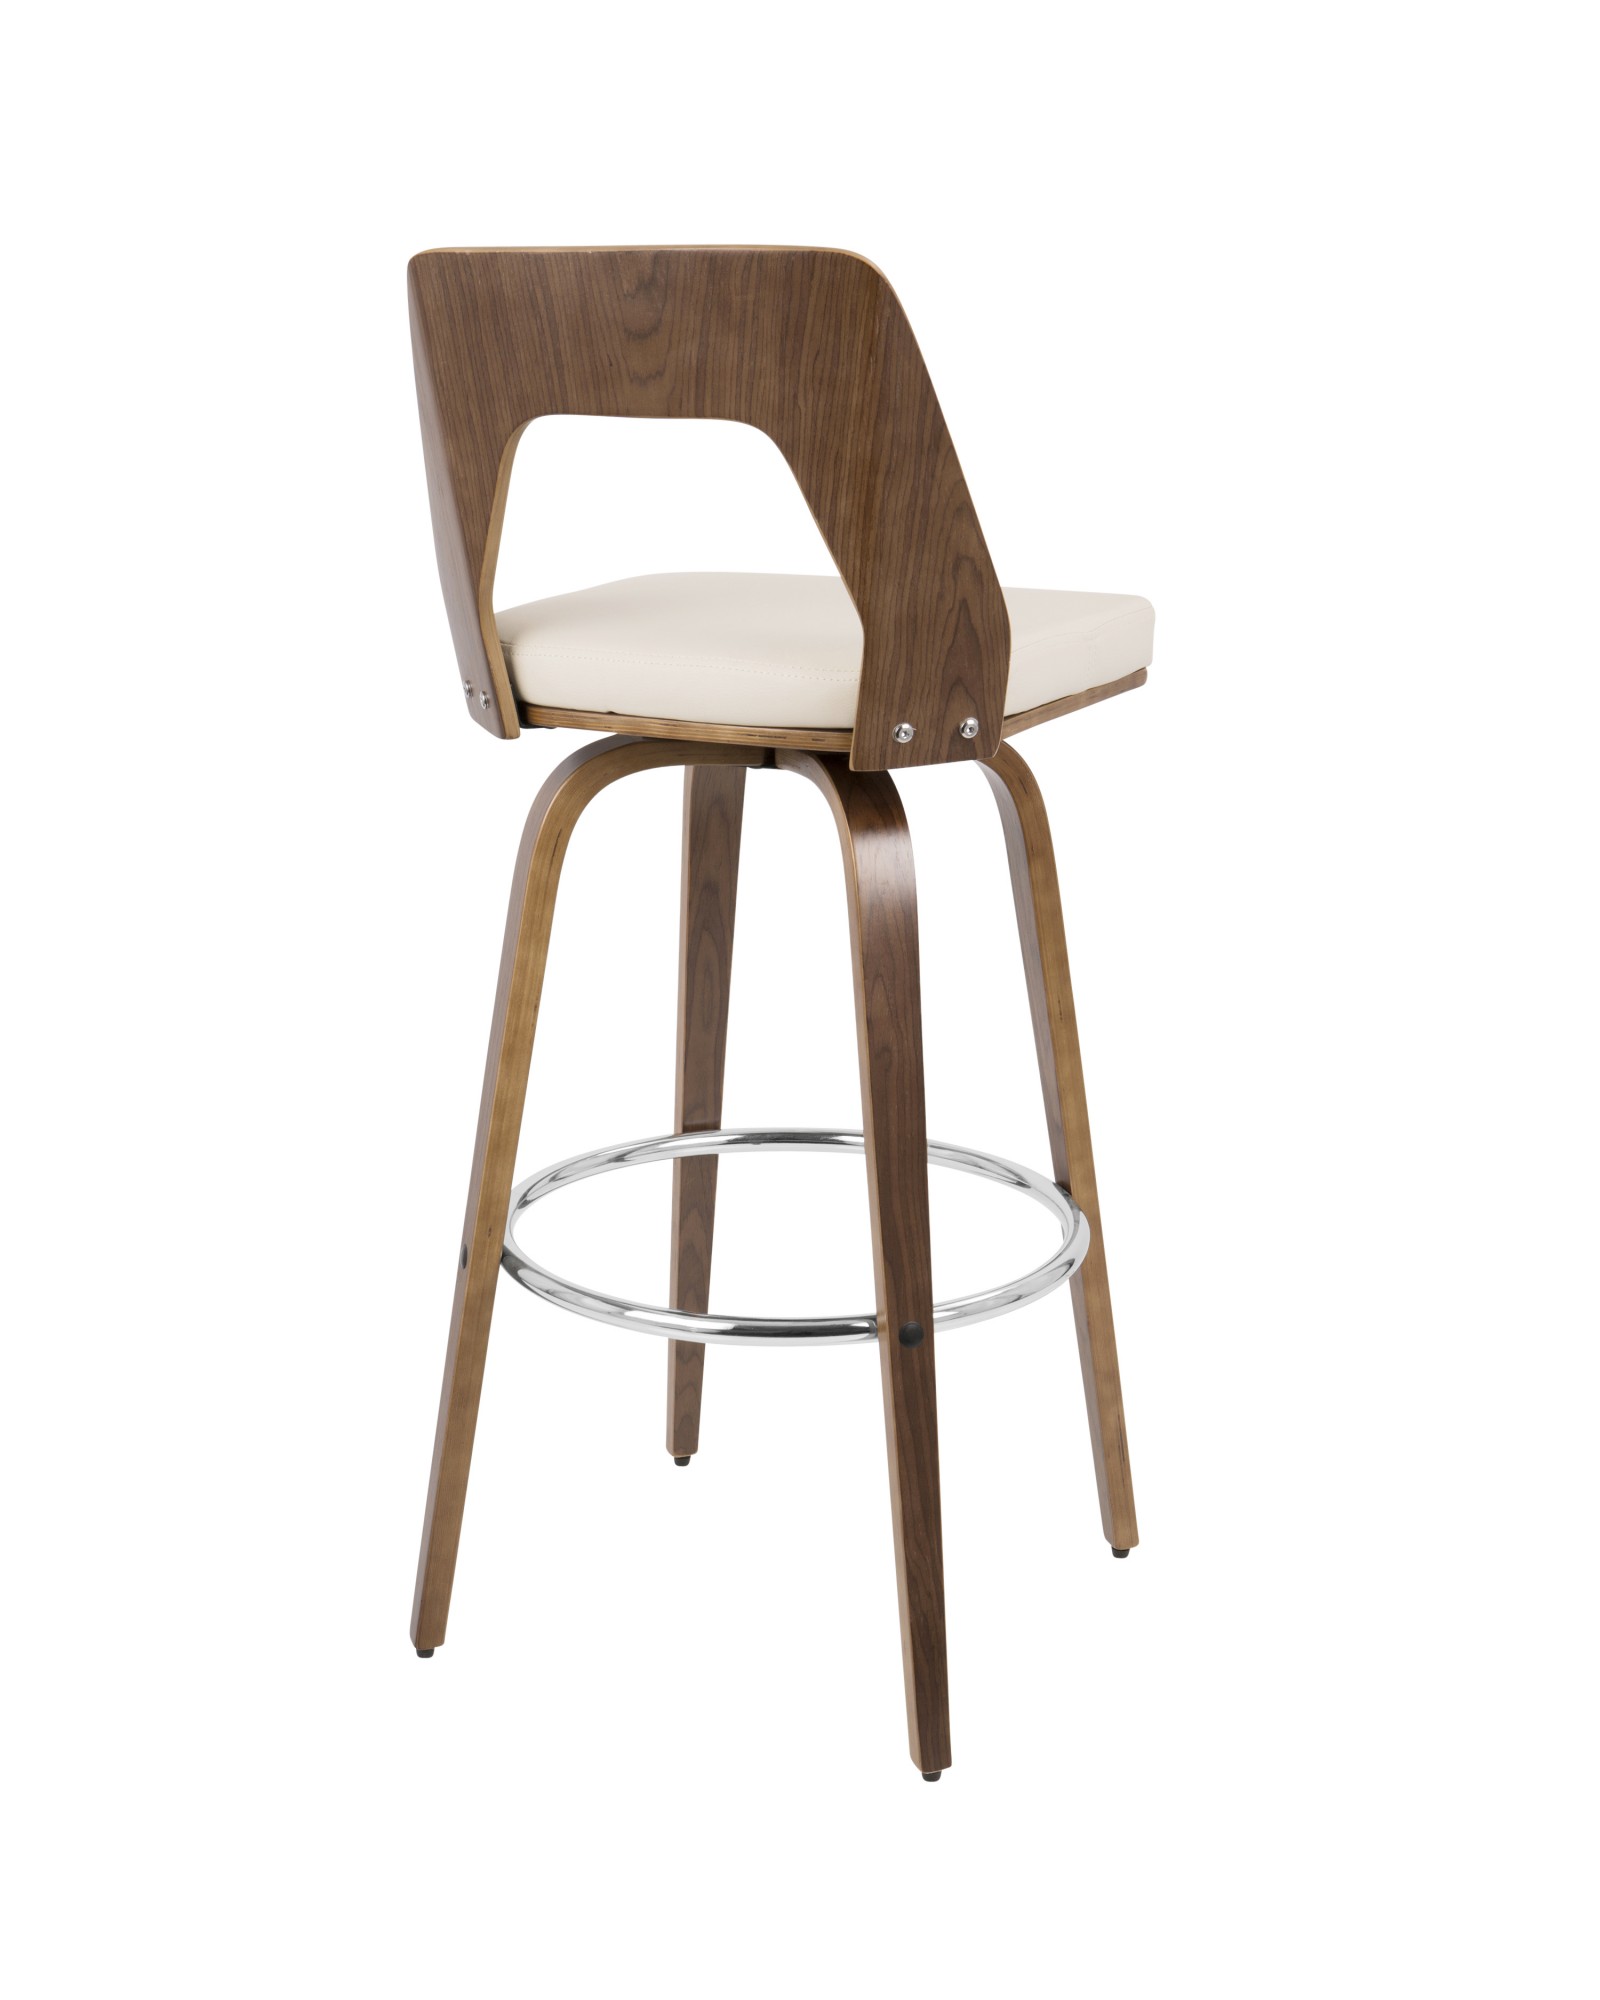 Trilogy Mid-Century Modern Barstool in Walnut and Cream Faux Leather